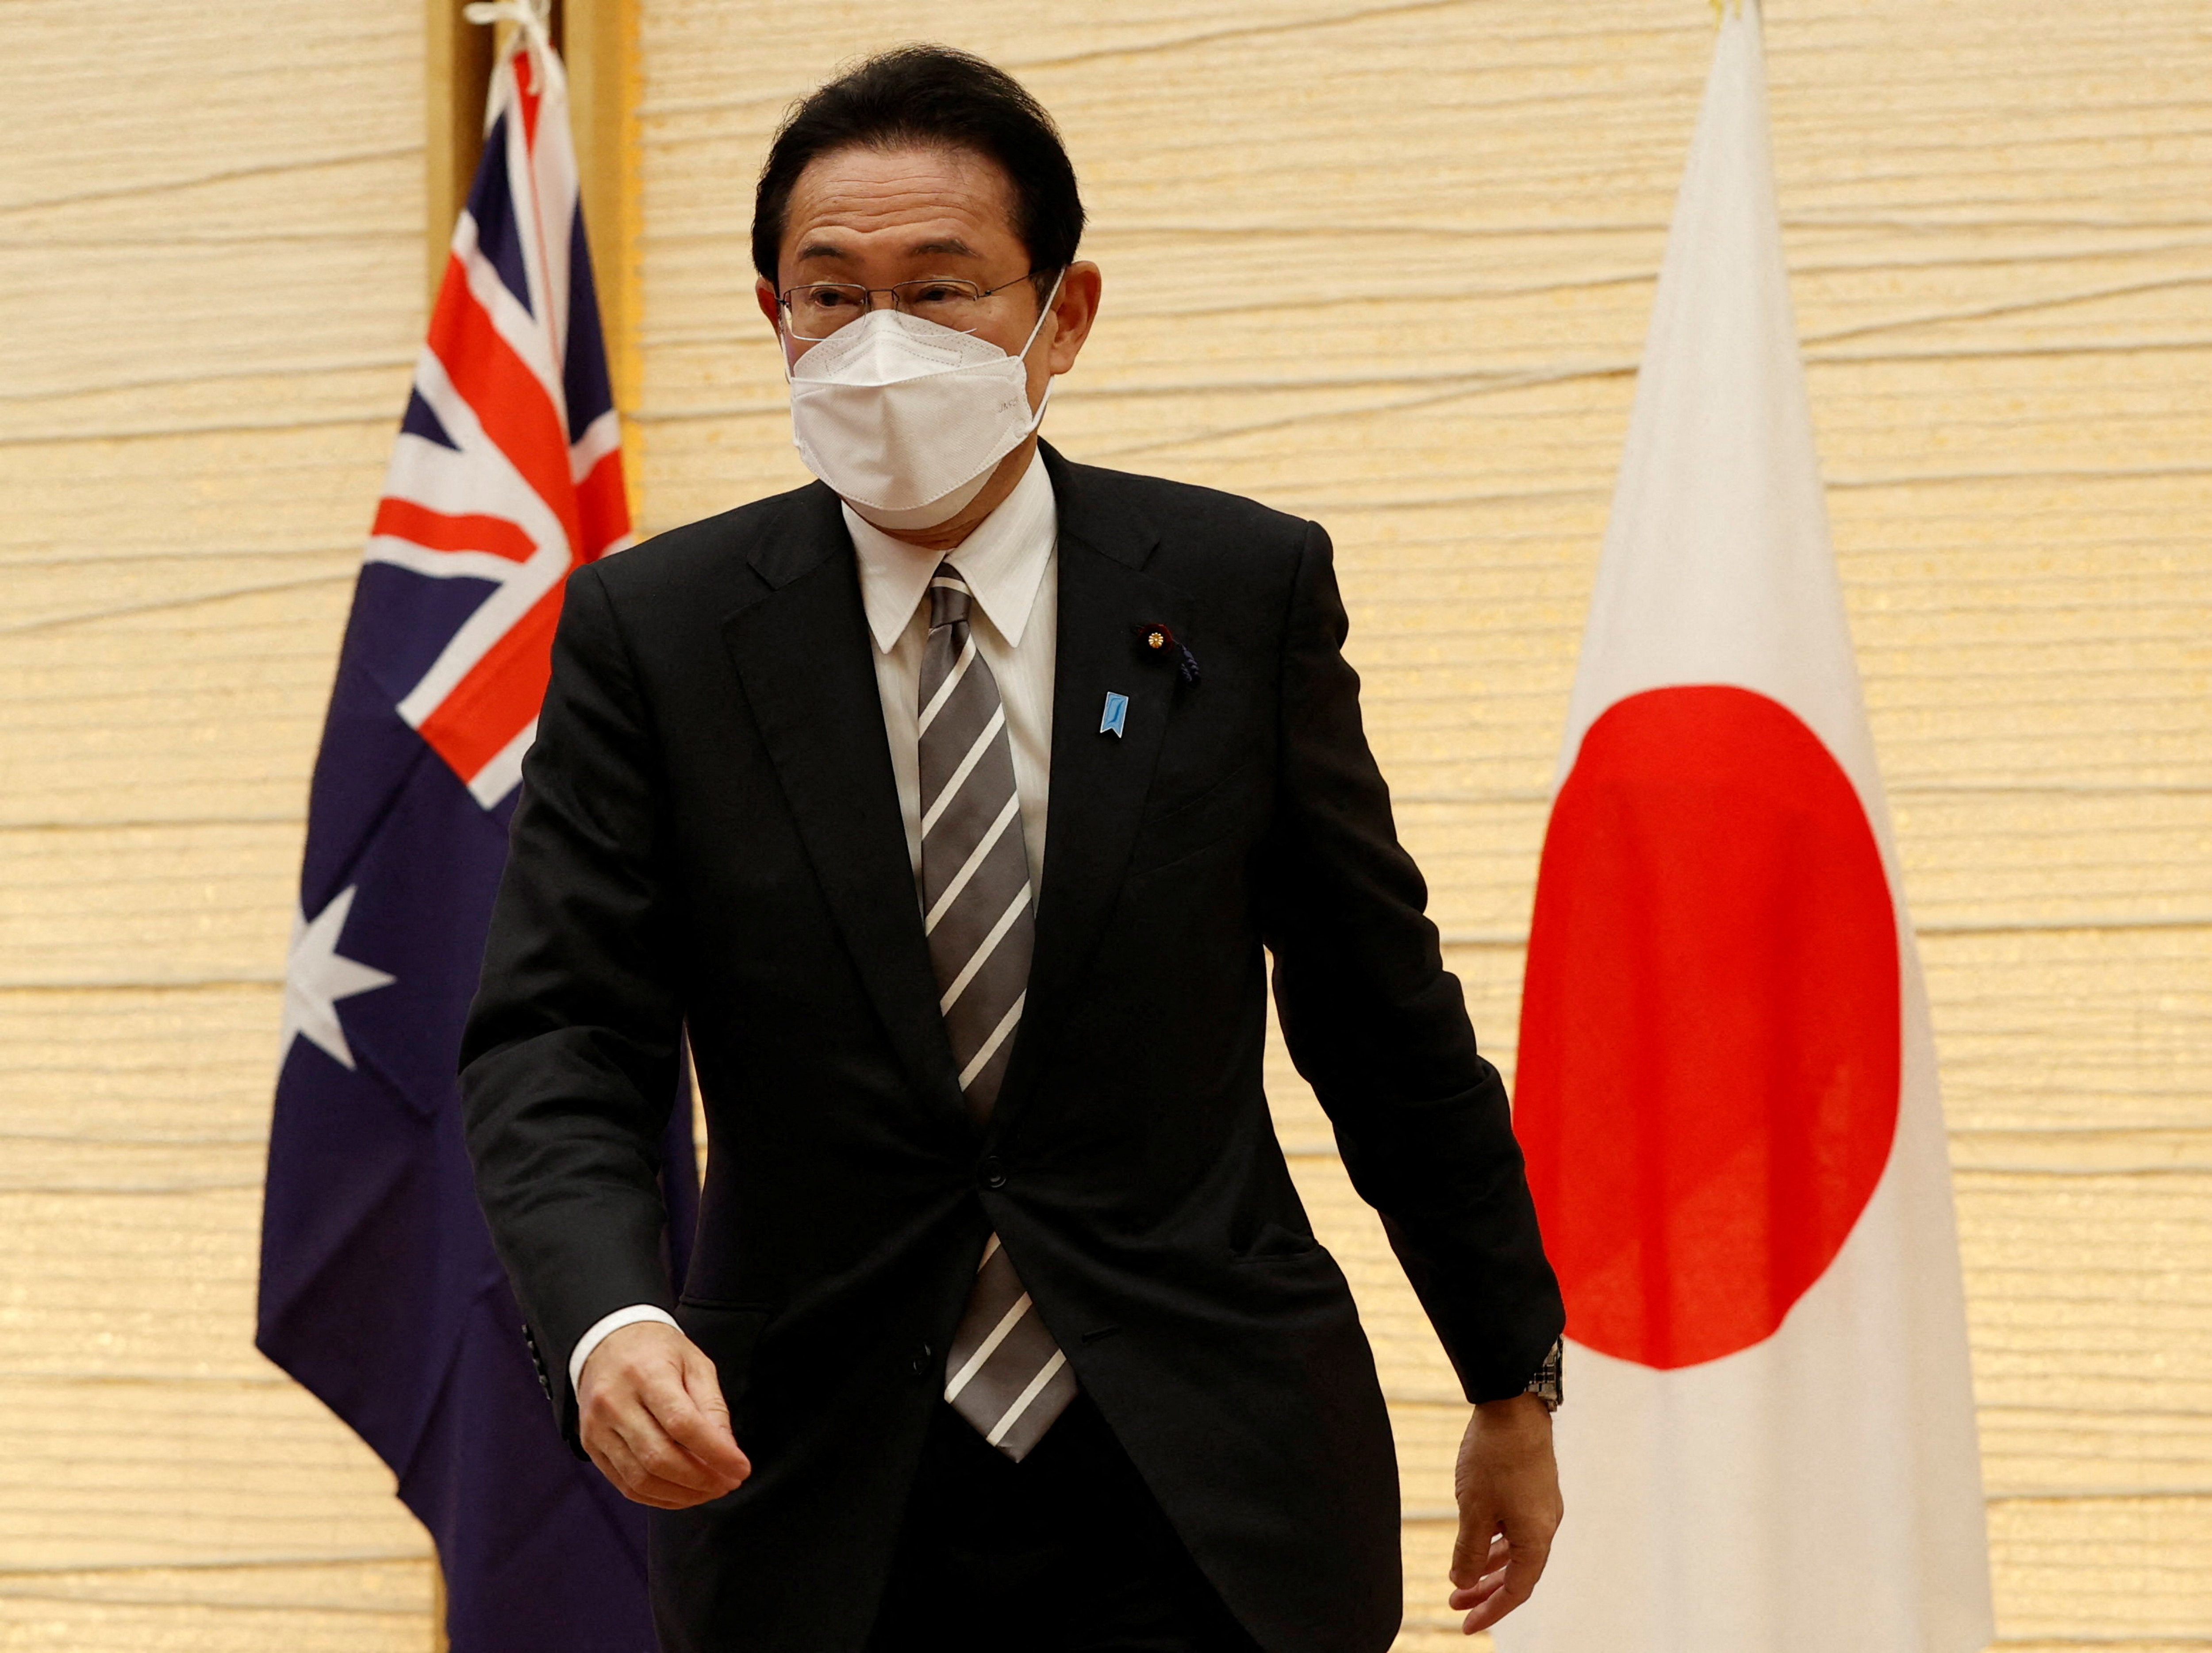 Japan's Prime Minister Fumio Kishida attends a video signing ceremony of the bilateral reciprocal access agreement with Australia's Prime Minister Scott Morrison (not pictured) at Kishida's official residence in Tokyo, Japan January 6, 2022.  REUTERS/Issei Kato/Pool